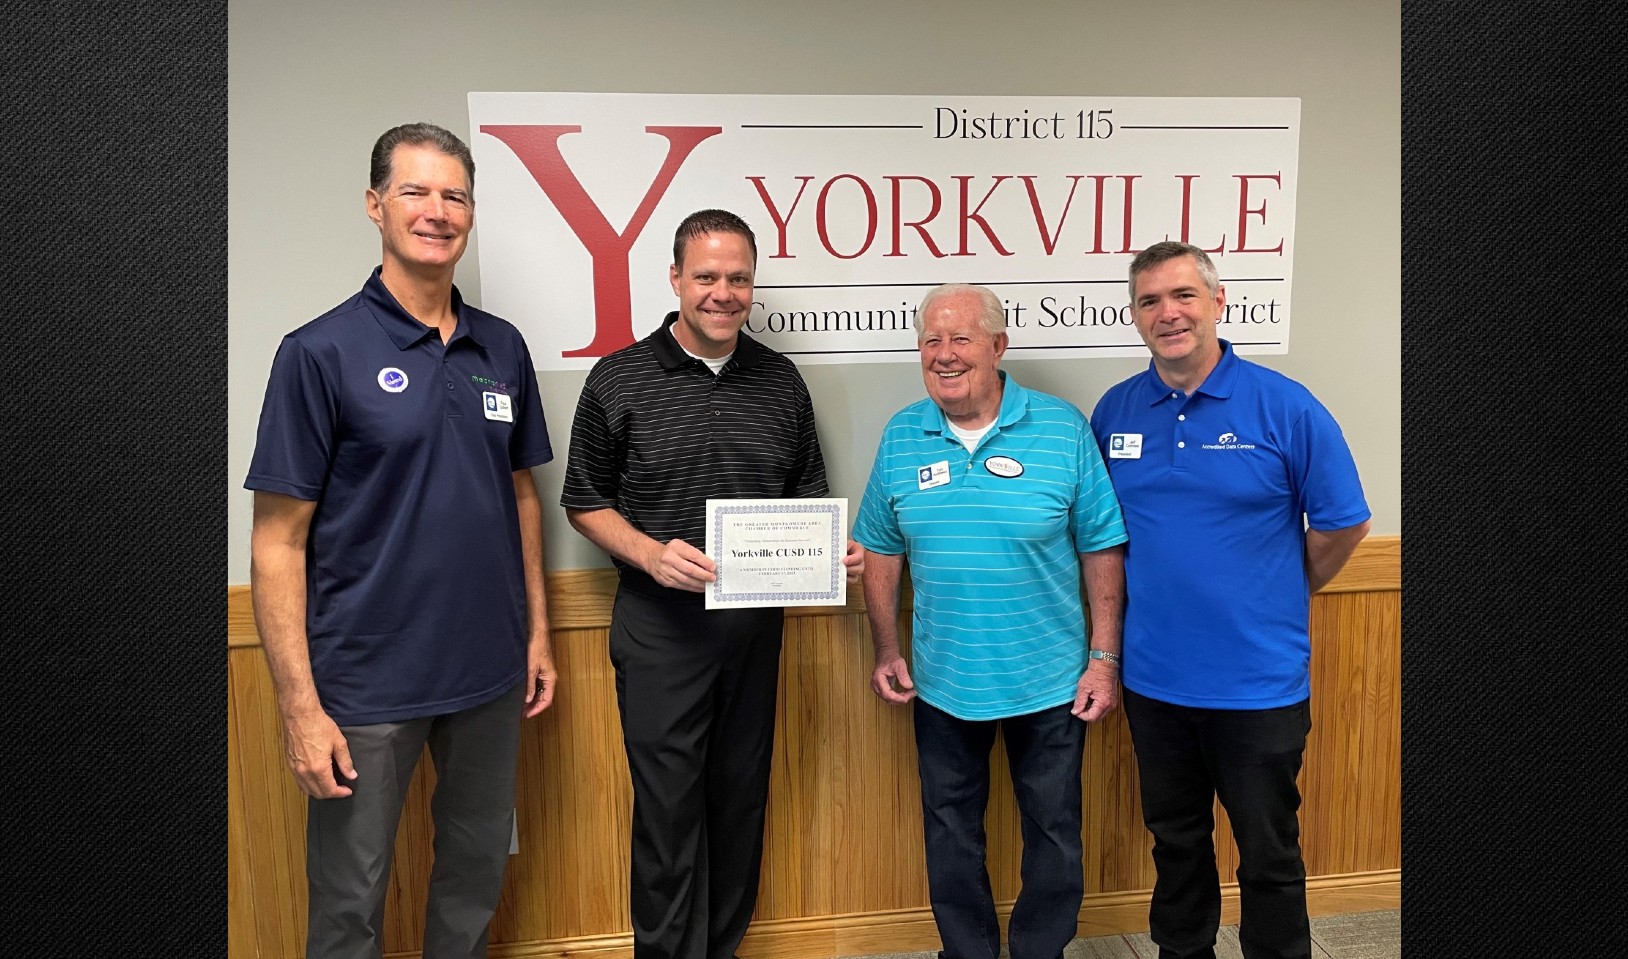 Welcome New Chamber Member Yorkville CUSD 115!